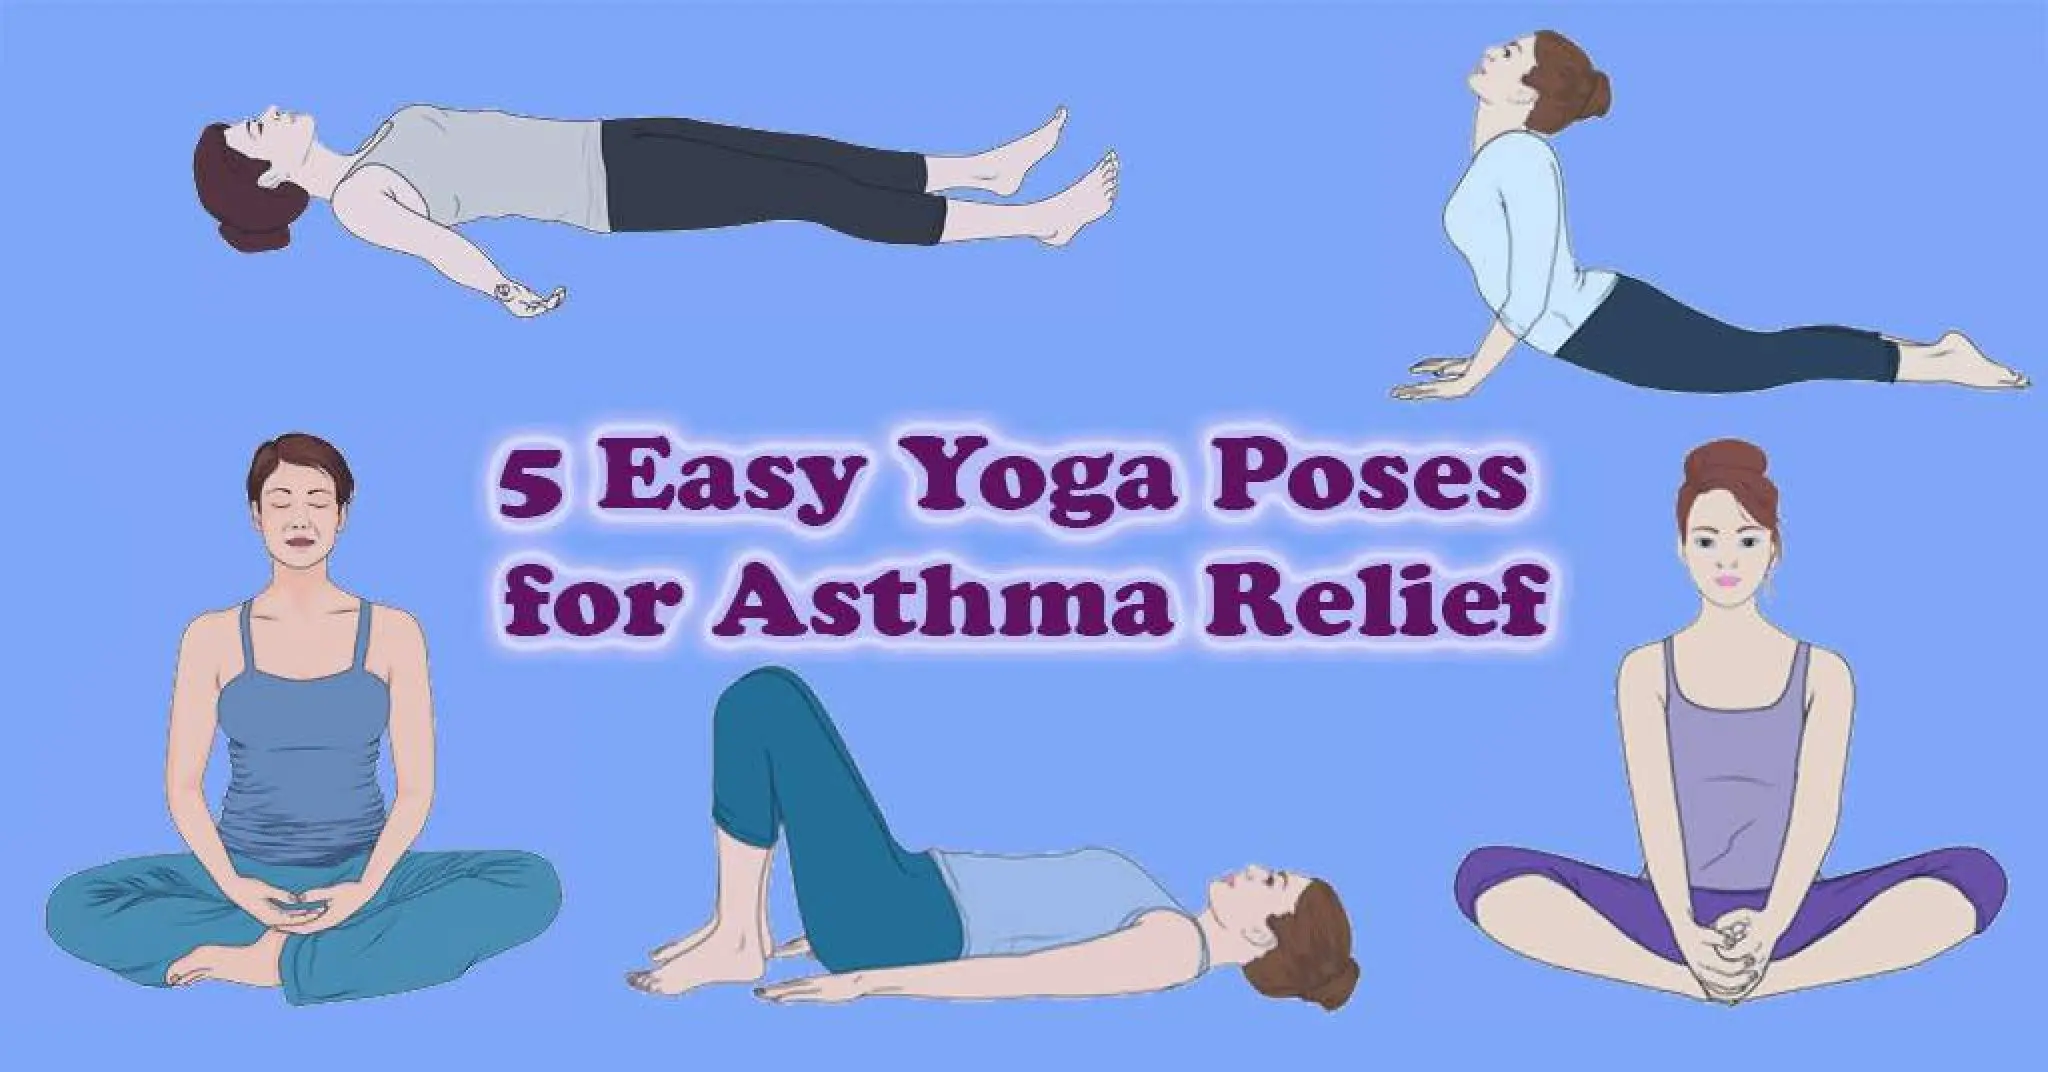 5 Easy Yoga Poses for Asthma Relief - River Oaks Beauty Bar